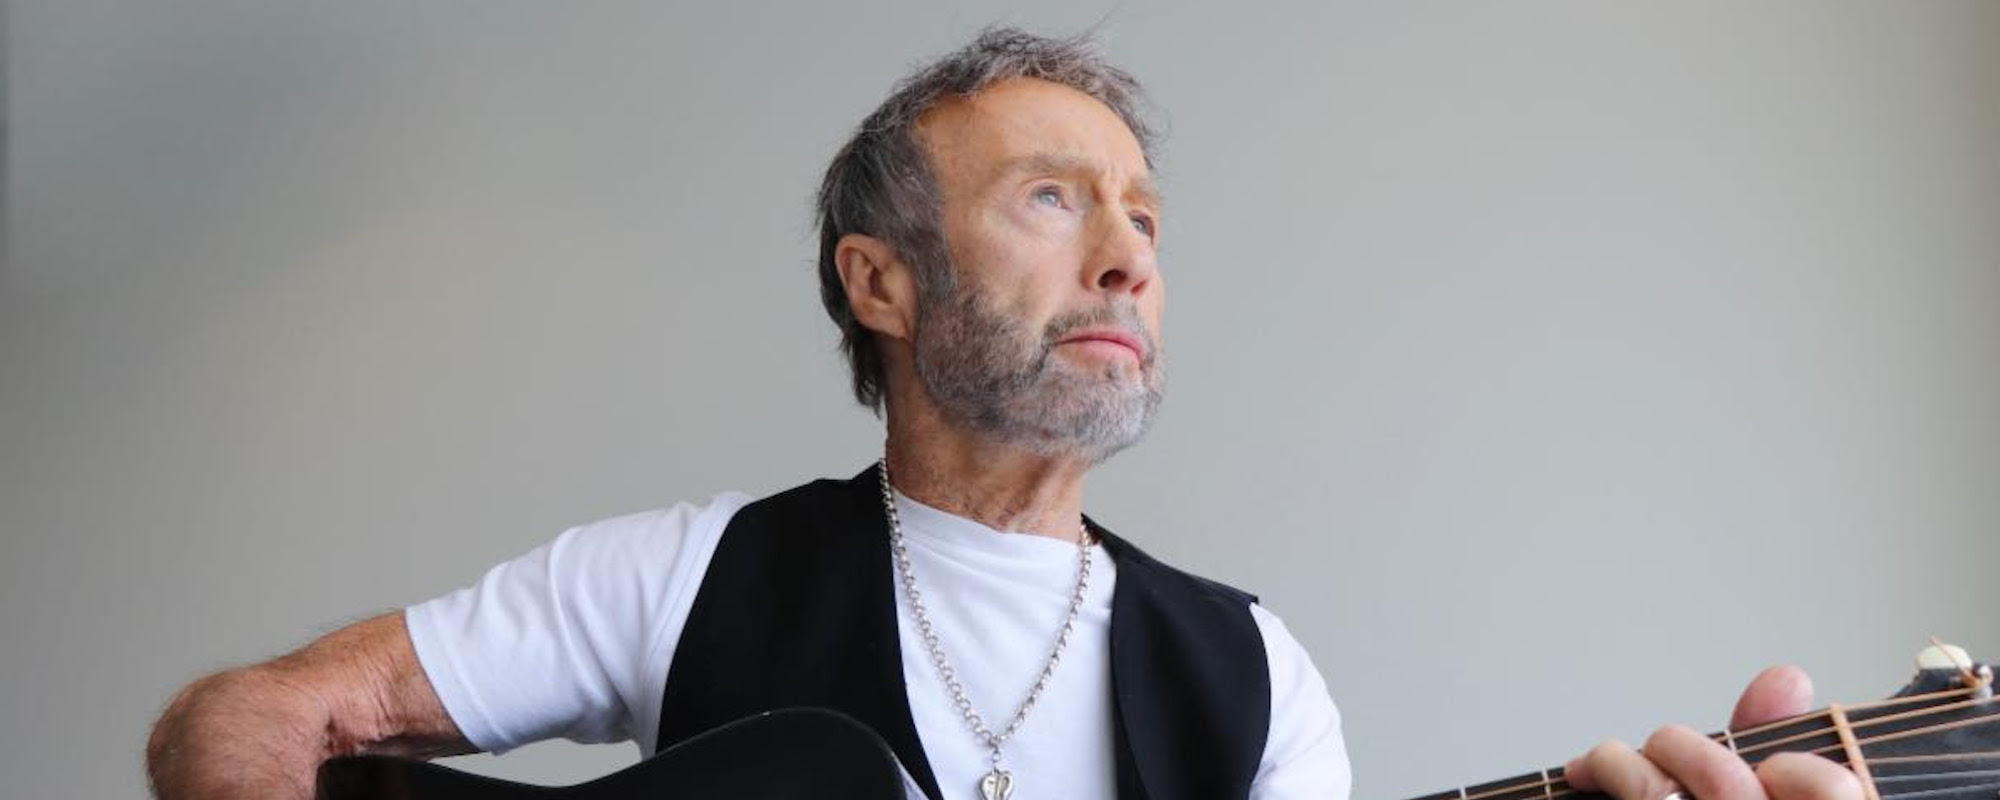 Why Paul Rodgers Didn’t Sing the Free Hit “All Right Now” for Nearly 20 Years